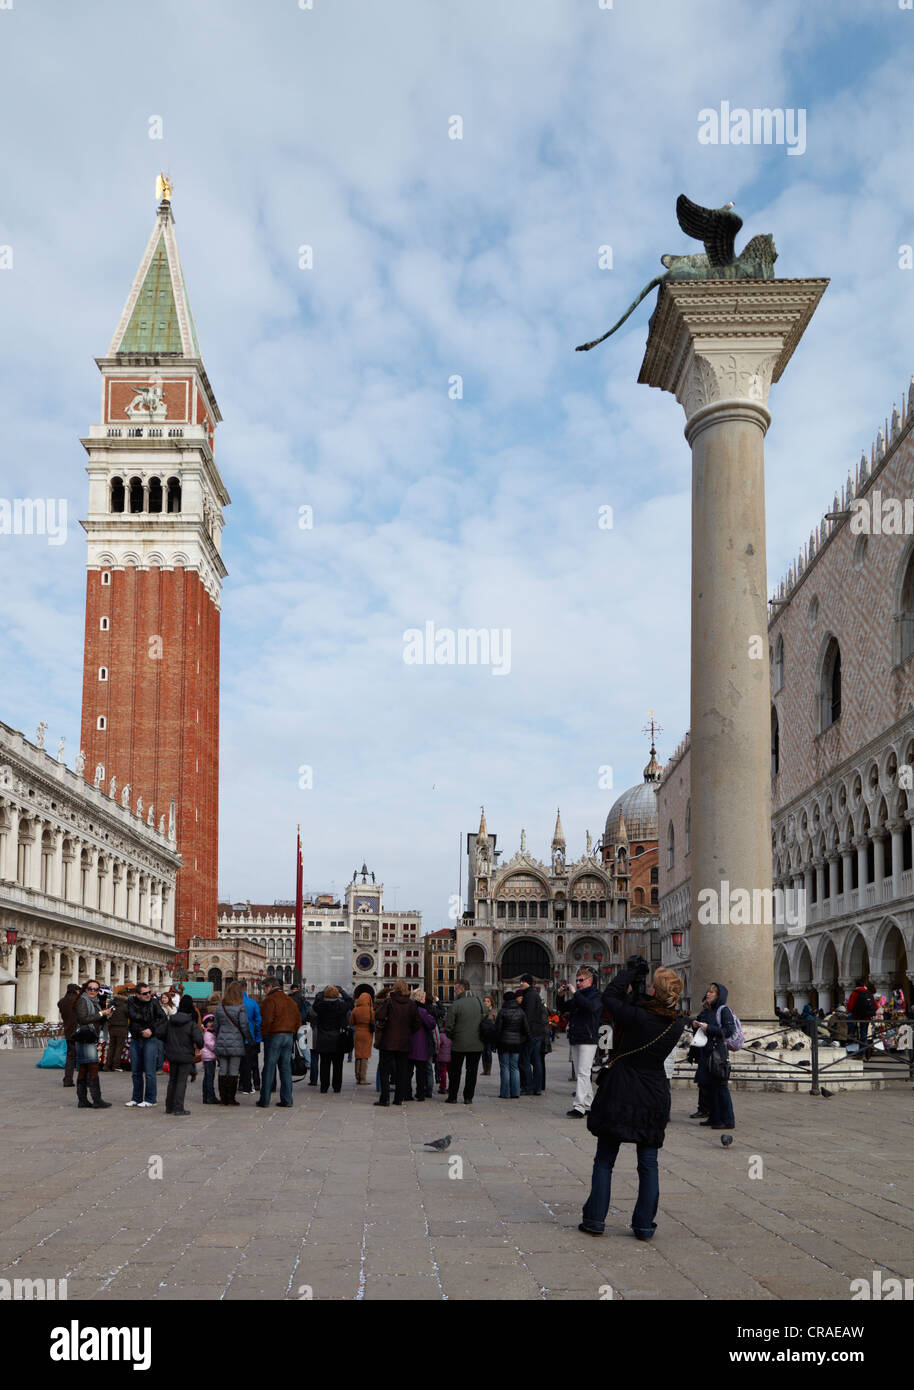 St. Mark's Square or Piazza San Marco, Campanile and the Column of the Lion of St. Mark, Venice, Veneto, Italy, Europe Stock Photo